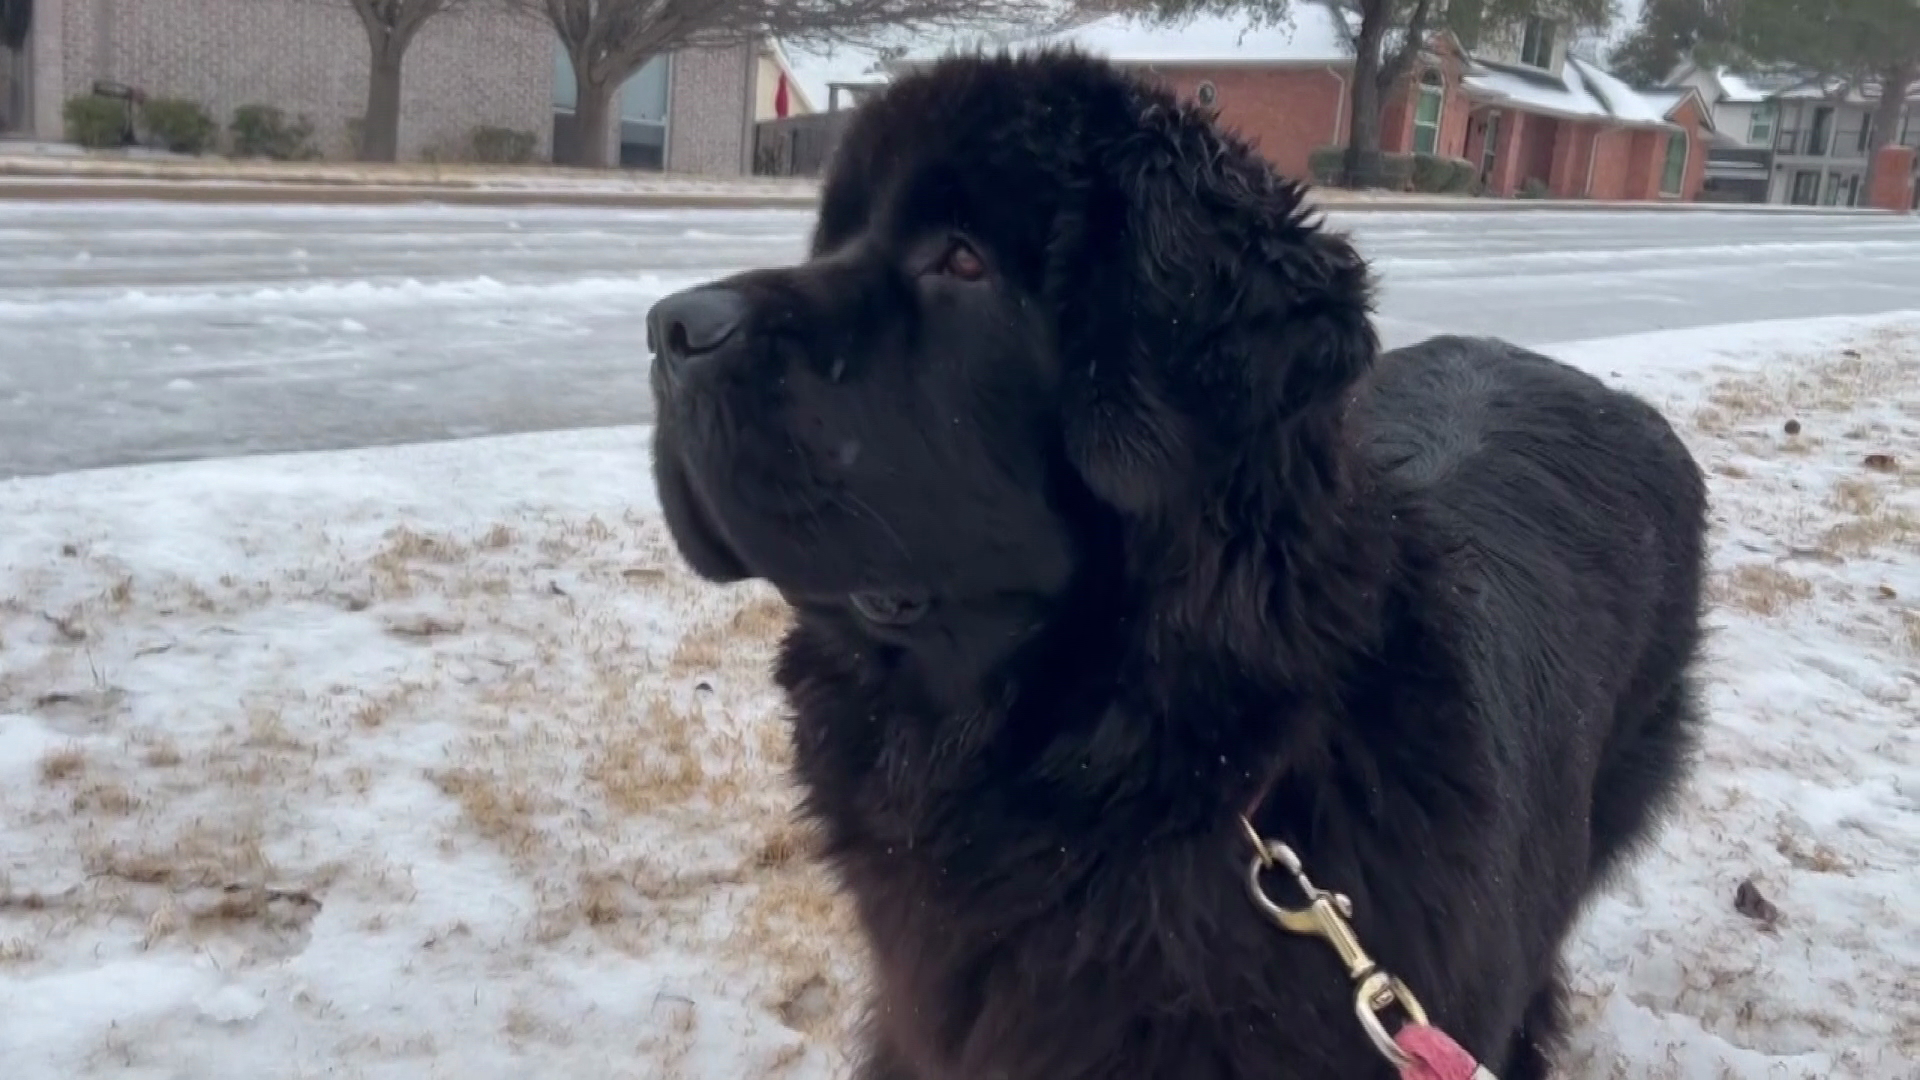 Despite the ice storm in the Dallas area, Millie the Newfie found ways to enjoy herself.